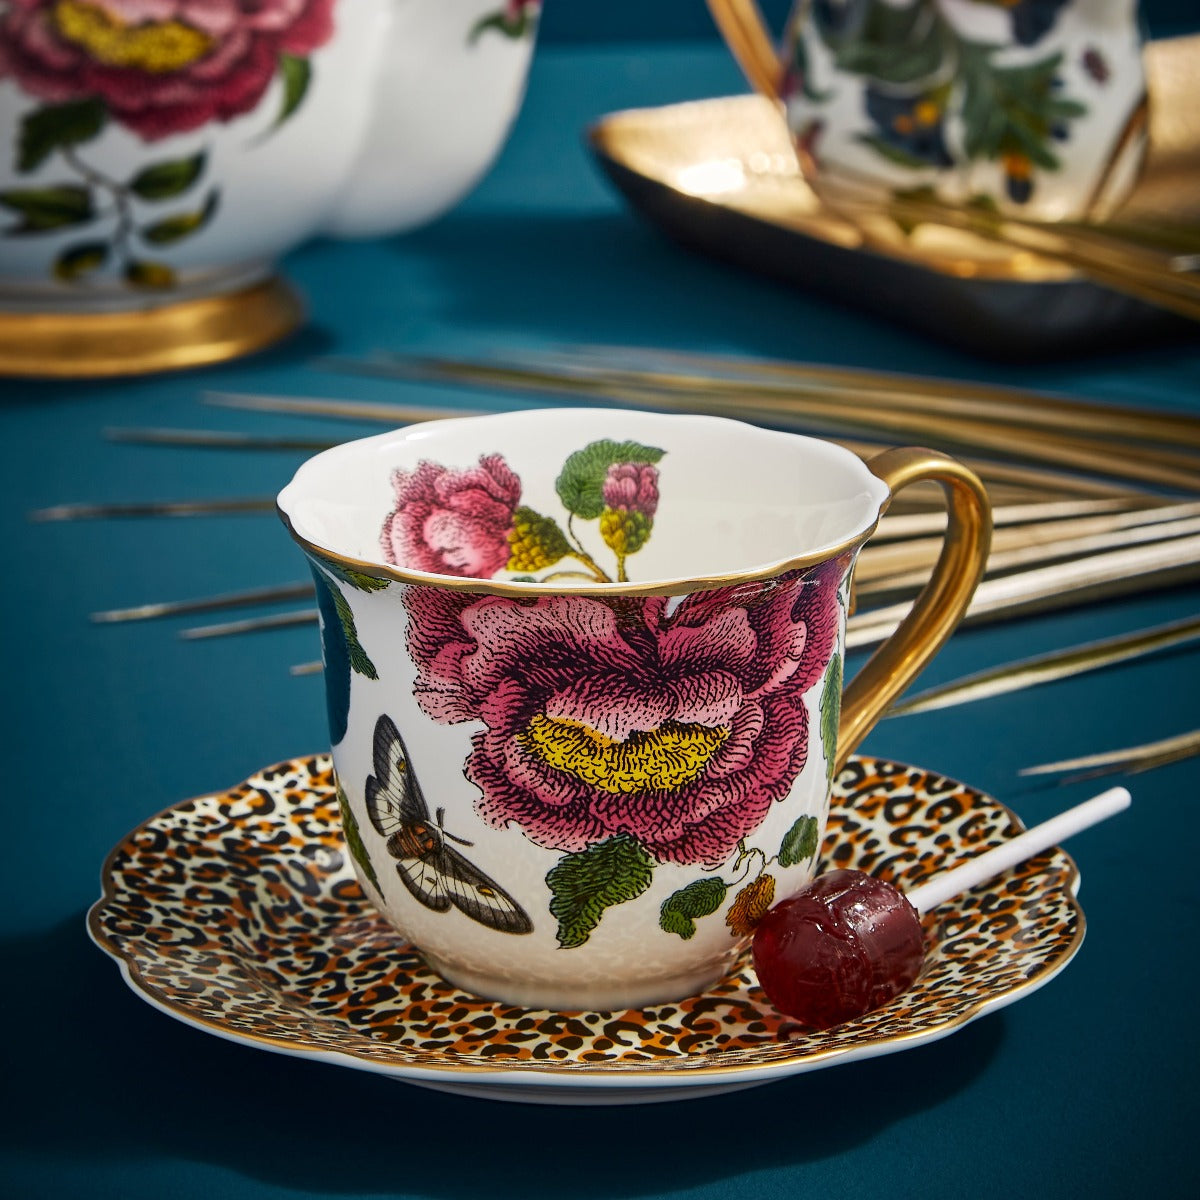 Creatures of Curiosity - White Leopard Teacup and Saucer--Magic Hour